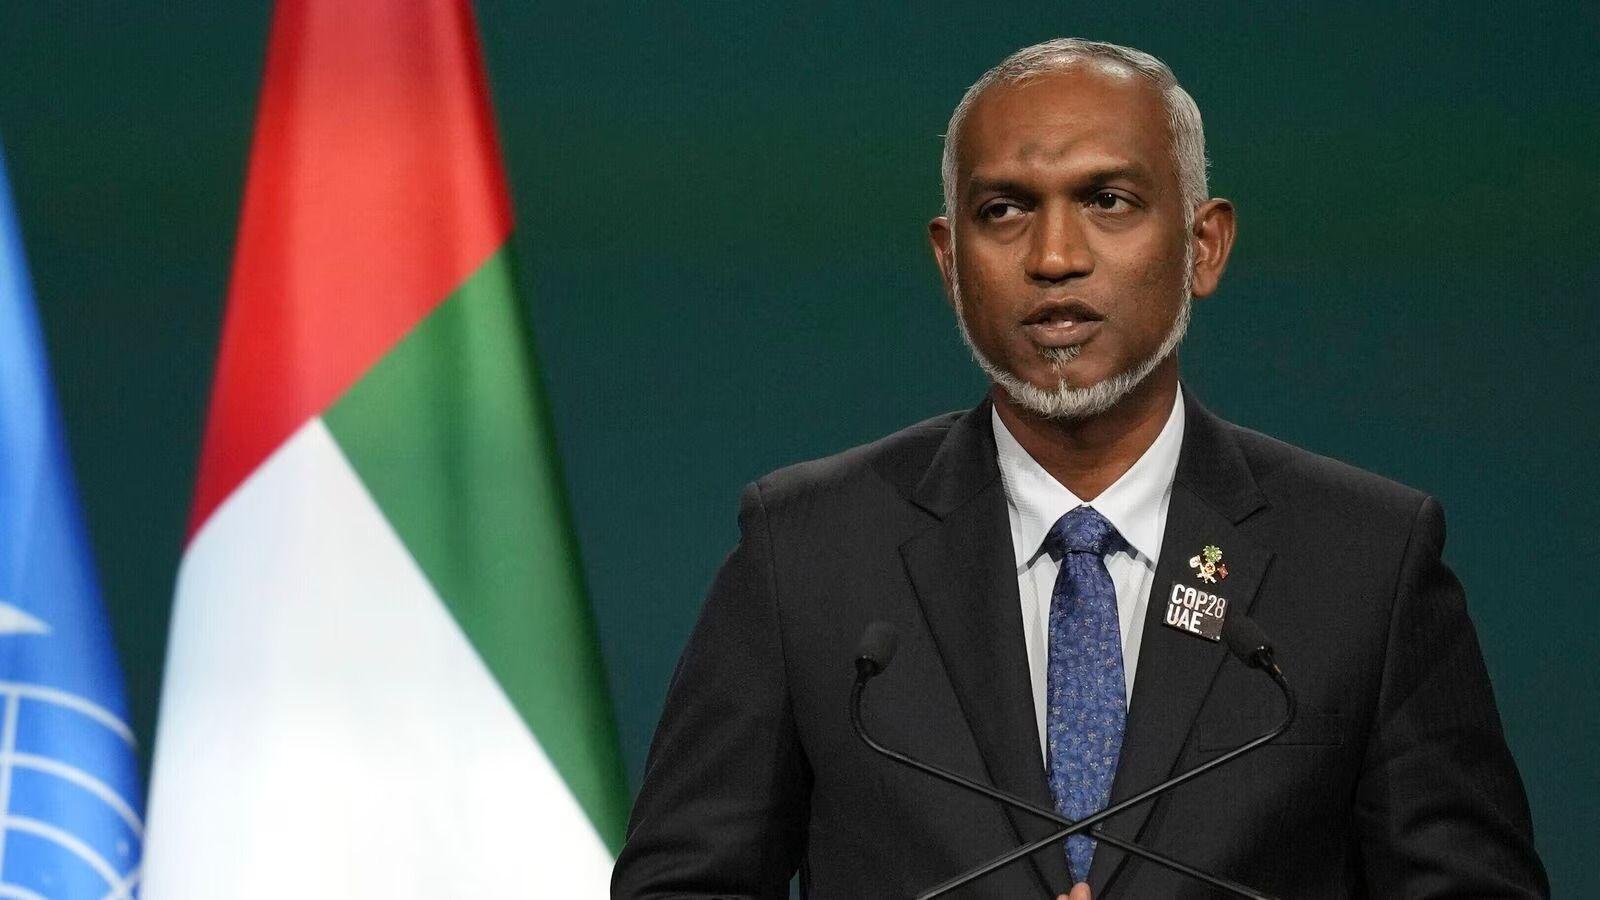 Maldives' President: We will not be intimidated